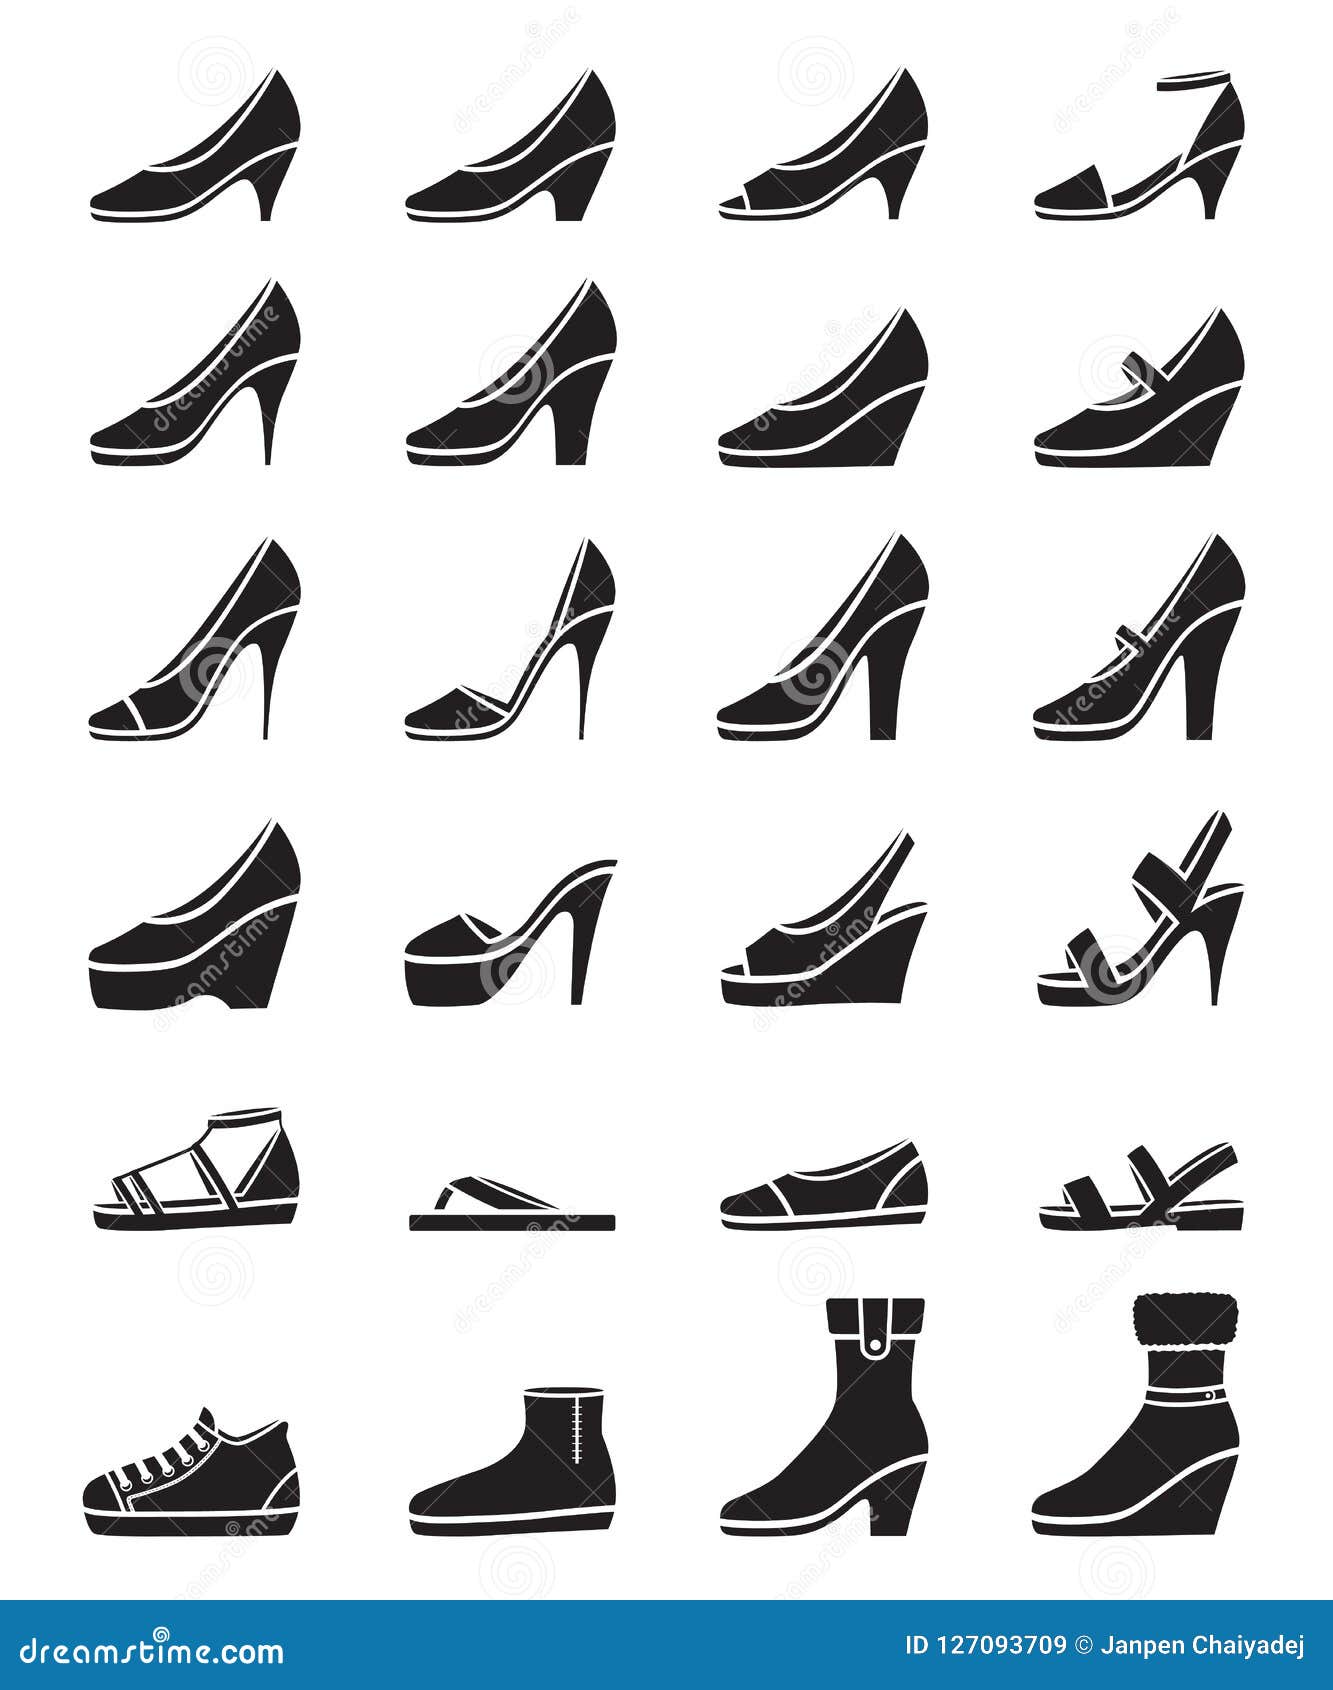 https://thumbs.dreamstime.com/z/set-different-types-women-s-shoes-monochrome-side-view-footwear-fashion-objects-sign-symbol-127093709.jpg